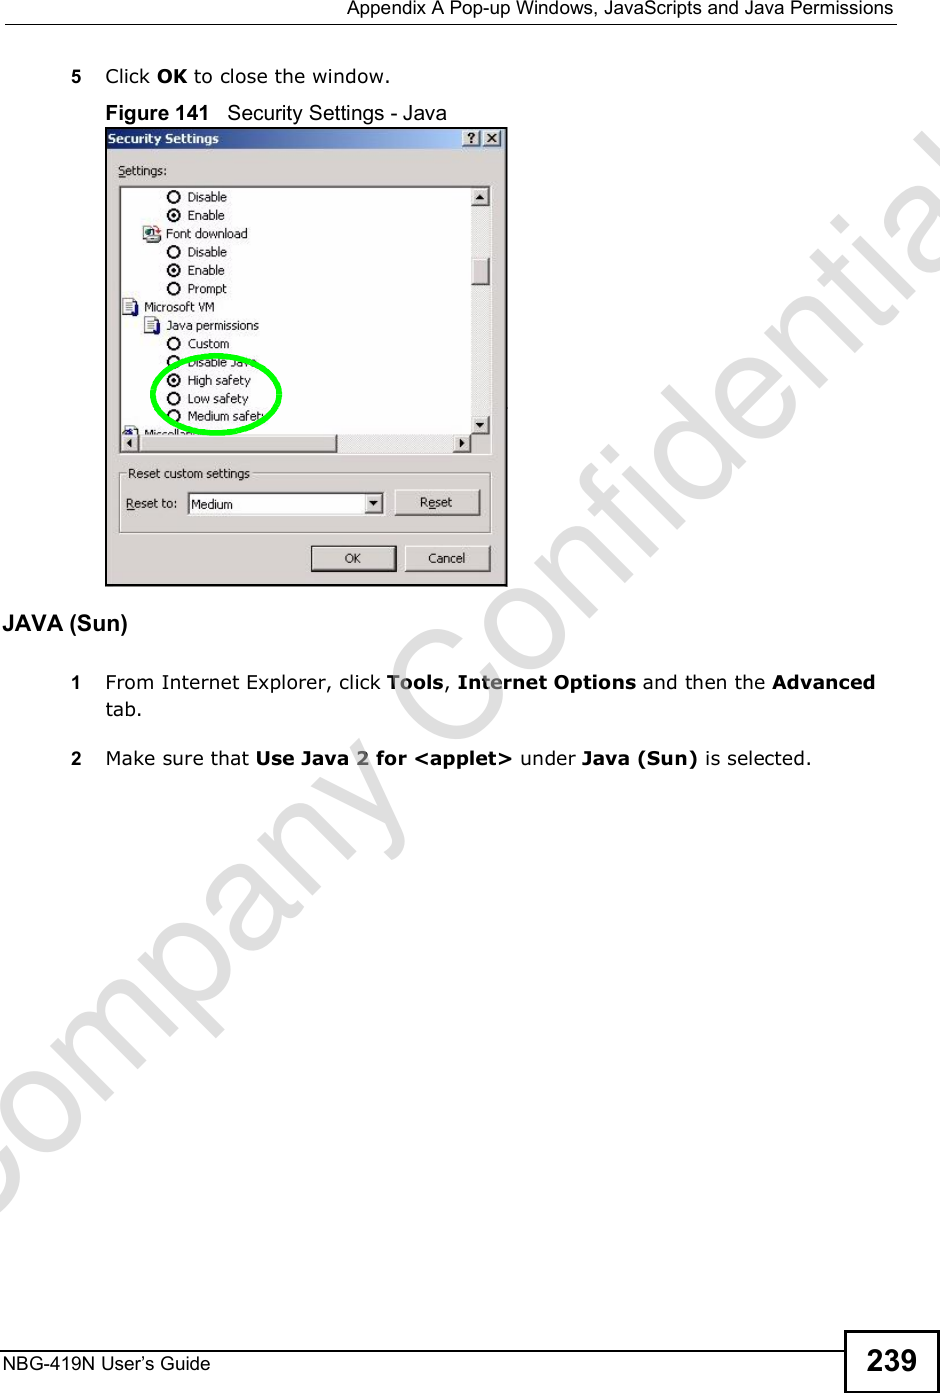  Appendix APop-up Windows, JavaScripts and Java PermissionsNBG-419N User s Guide 2395Click OK to close the window.Figure 141   Security Settings - Java JAVA (Sun)1From Internet Explorer, click Tools, Internet Options and then the Advanced tab. 2Make sure that Use Java 2 for &lt;applet&gt; under Java (Sun) is selected.Company Confidential